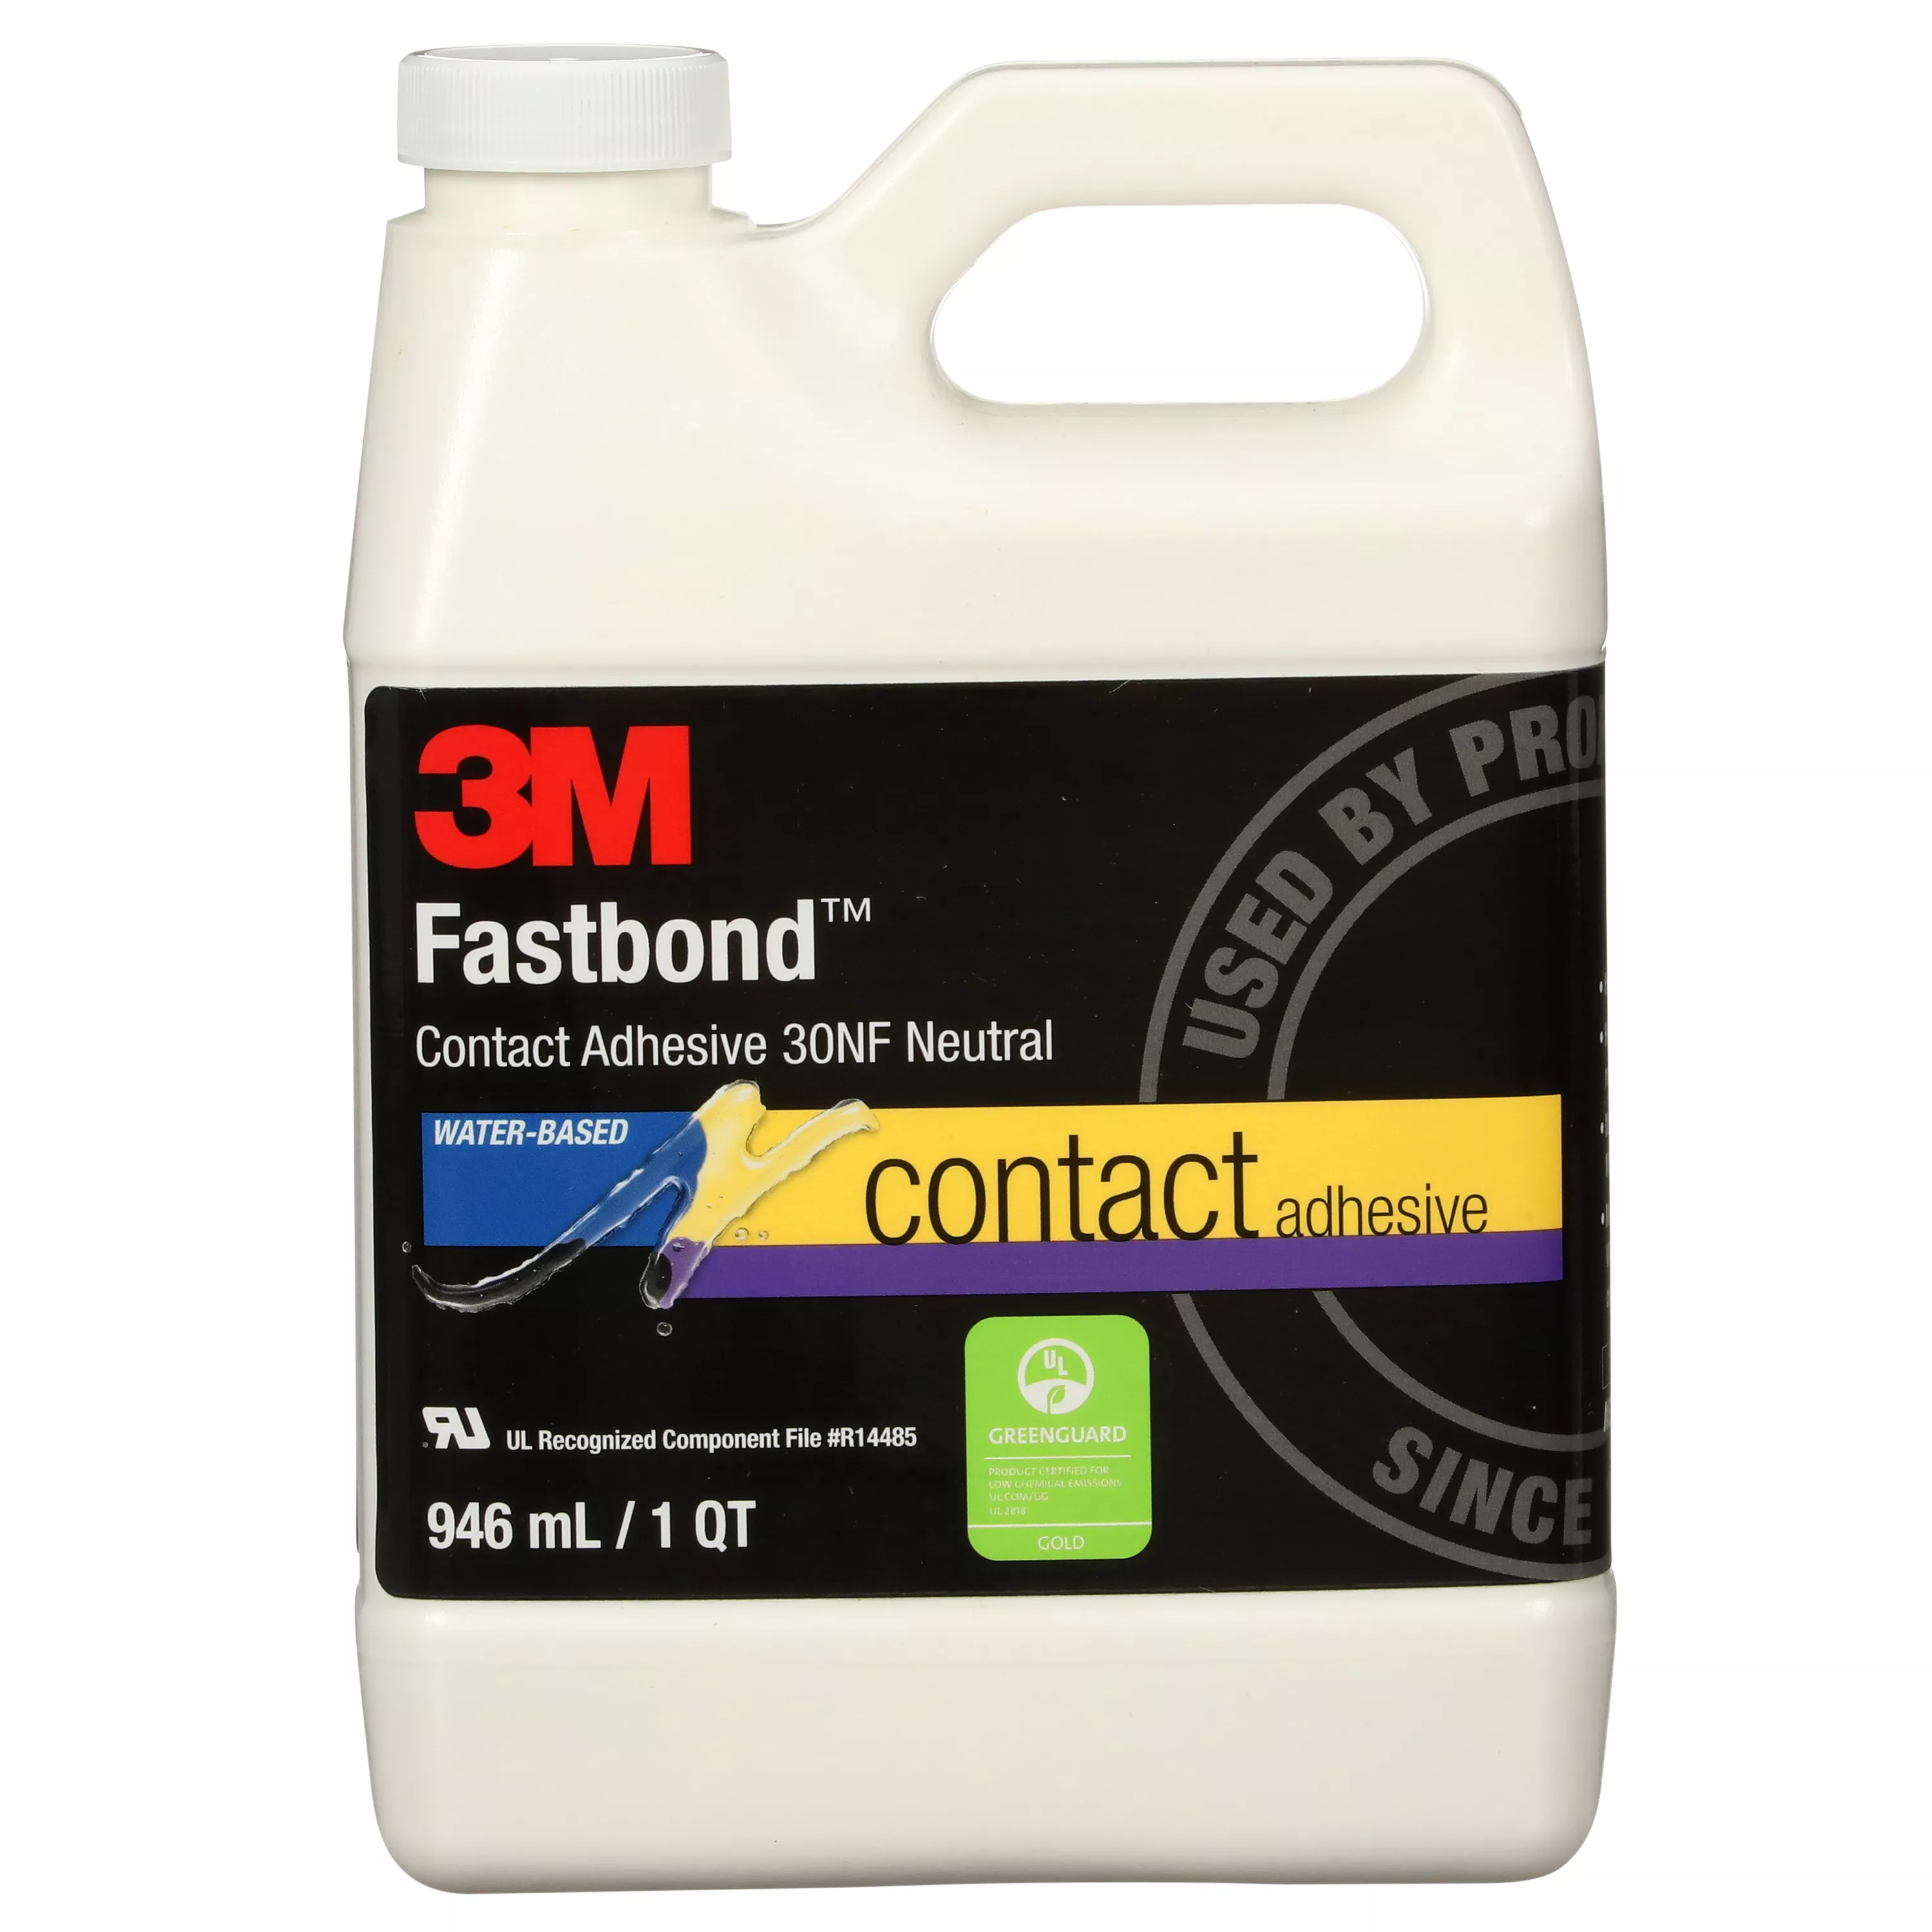 3M™ Fastbond™ Contact Adhesive 30NF, Neutral, 1 Quart, 12 Can/Case